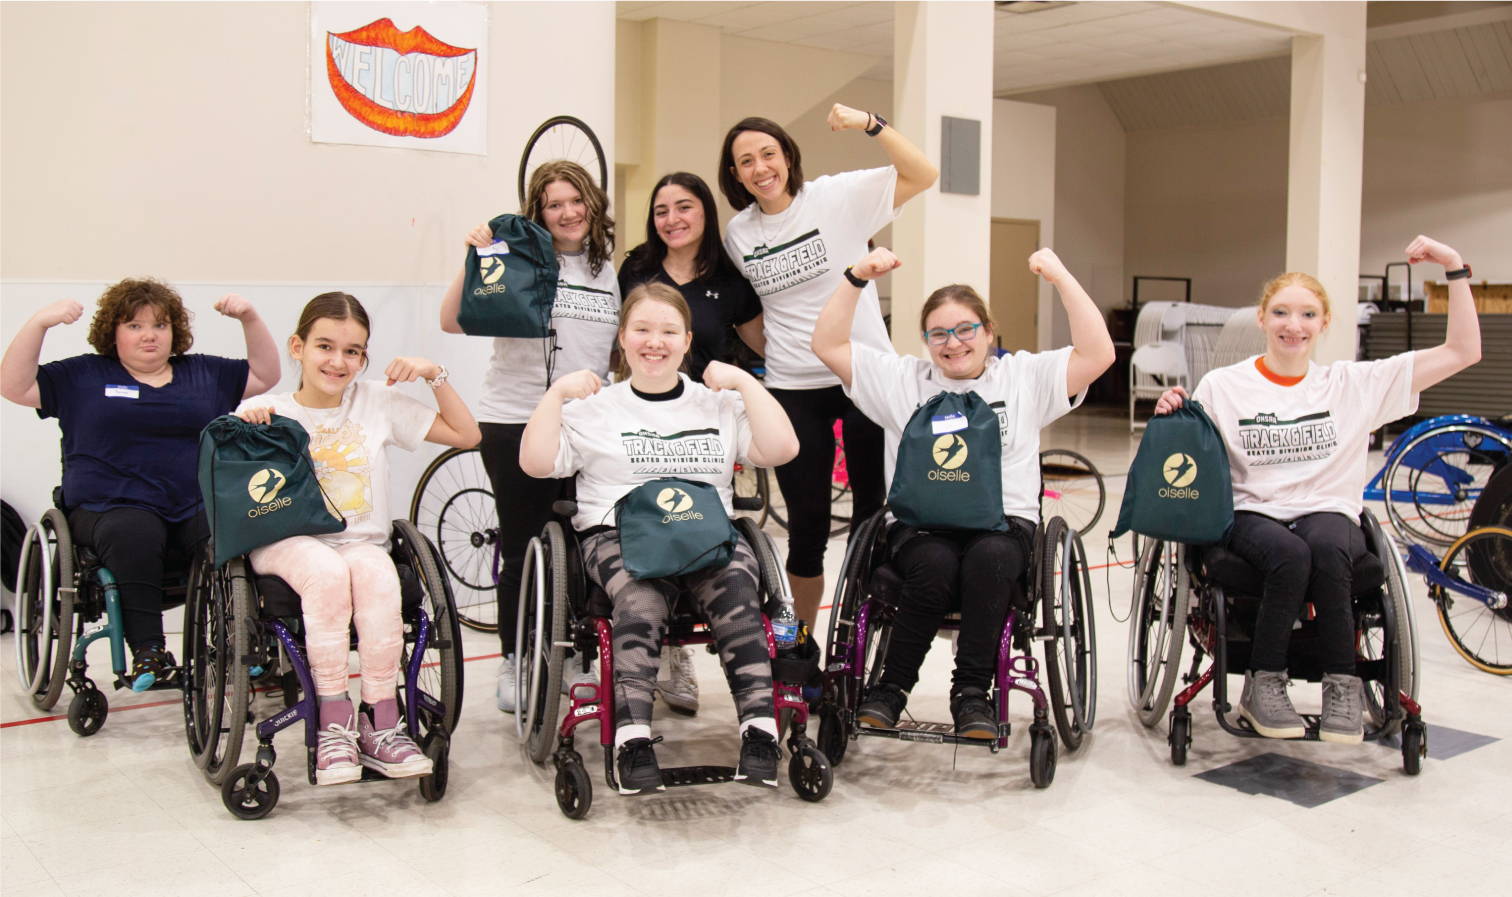 Young adaptive athletes pose in their wheelchairs with their gift bags from Oiselle